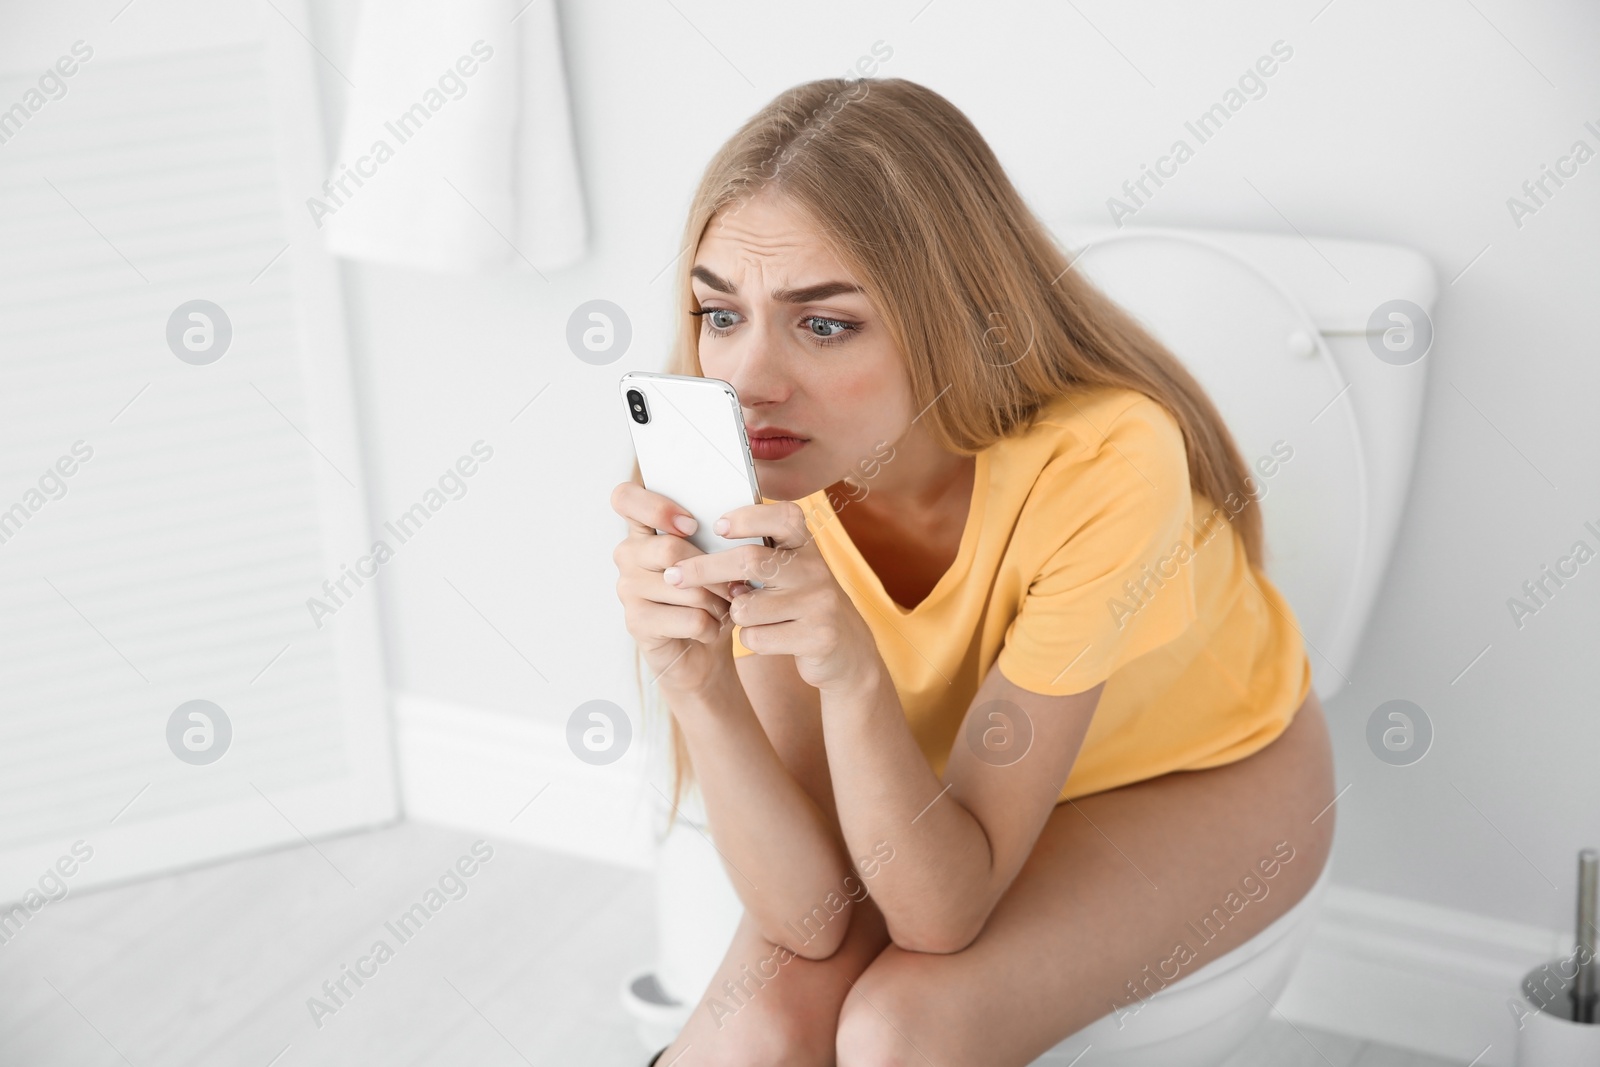 Photo of Young woman using mobile phone while sitting on toilet bowl at home